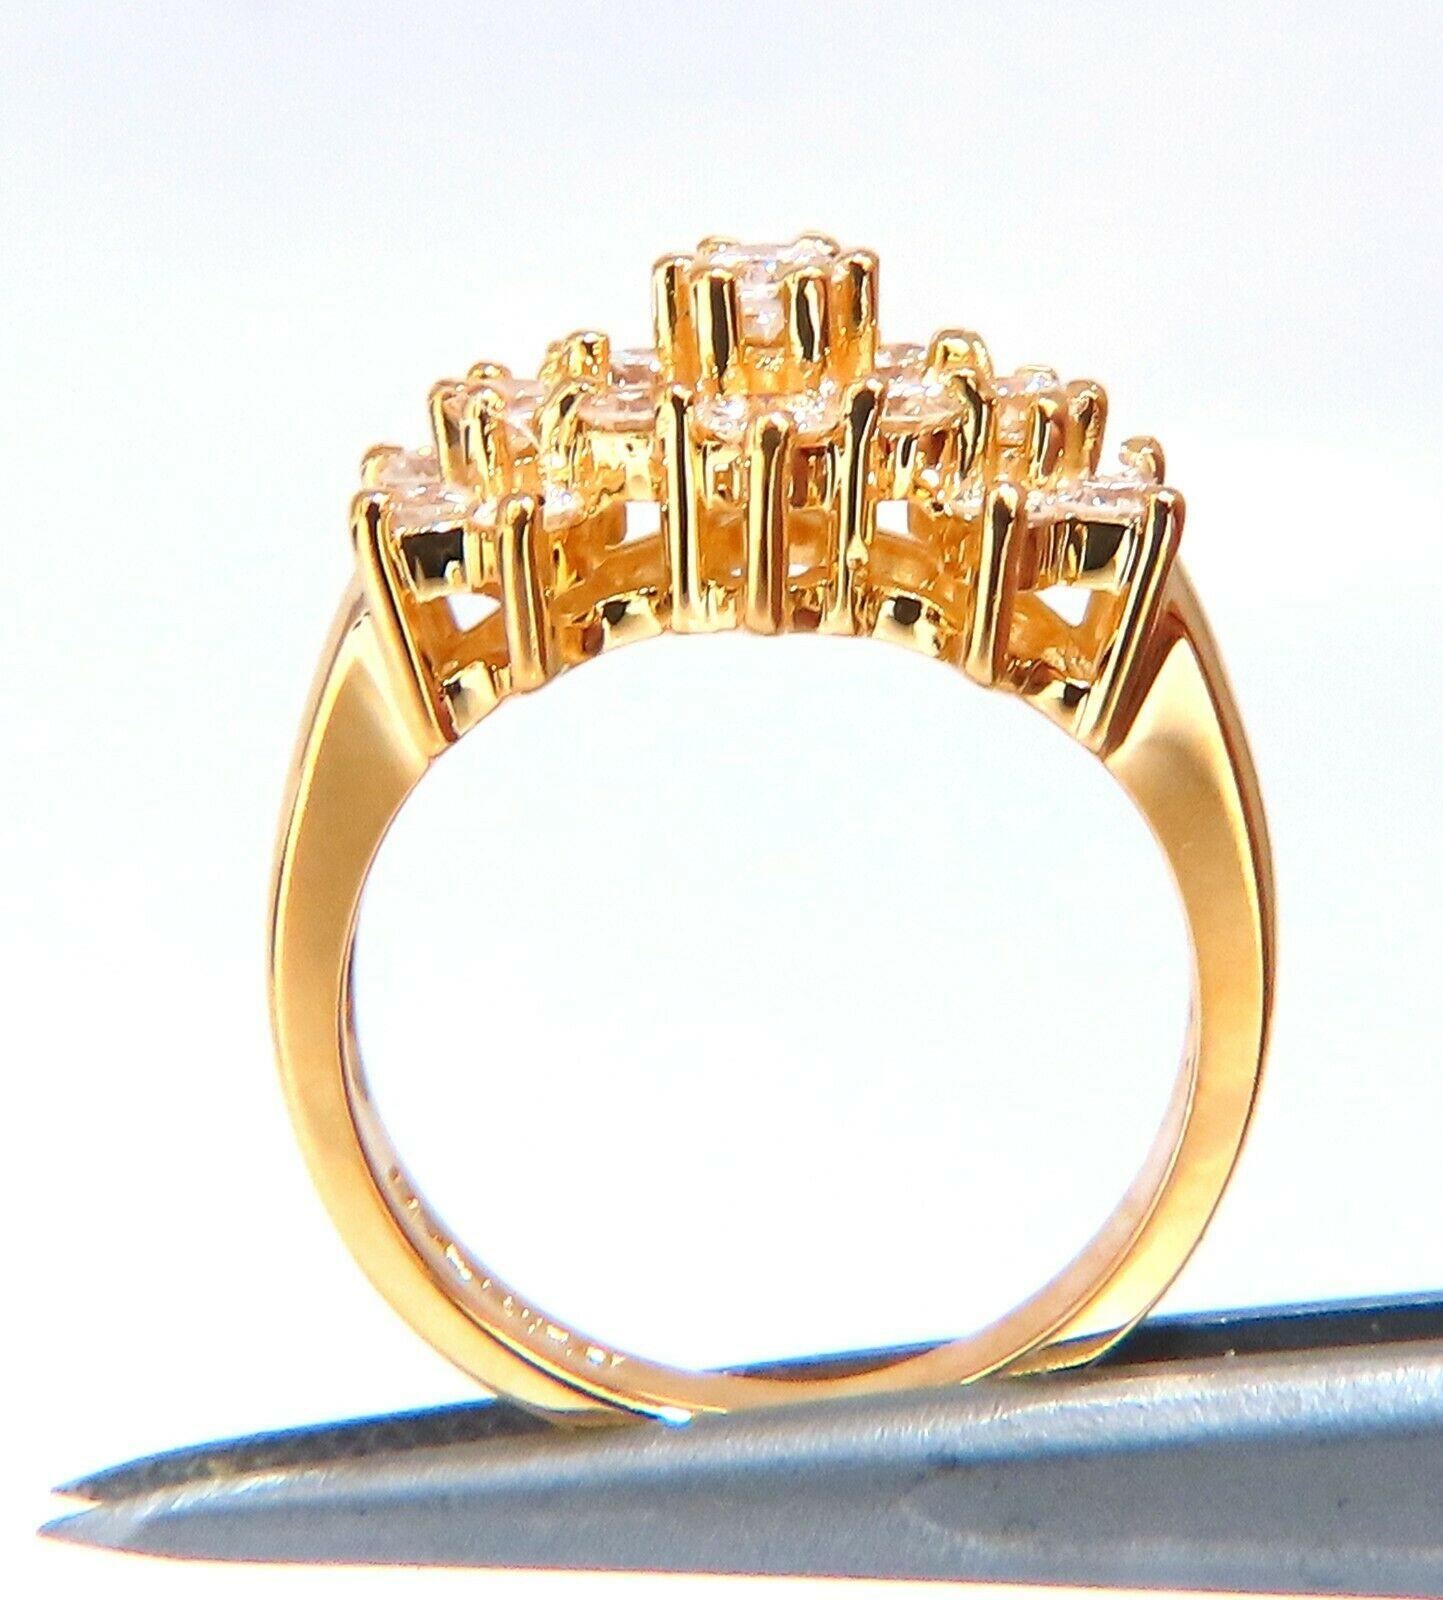 .80ct Round diamonds ring.

Diamonds: Vs-2 clarity, G color.

Cluster: 9.3mm diameter.

Depth of ring 7mm

Size 6 and can be sized.

4.8 grams. 14kt yellow gold